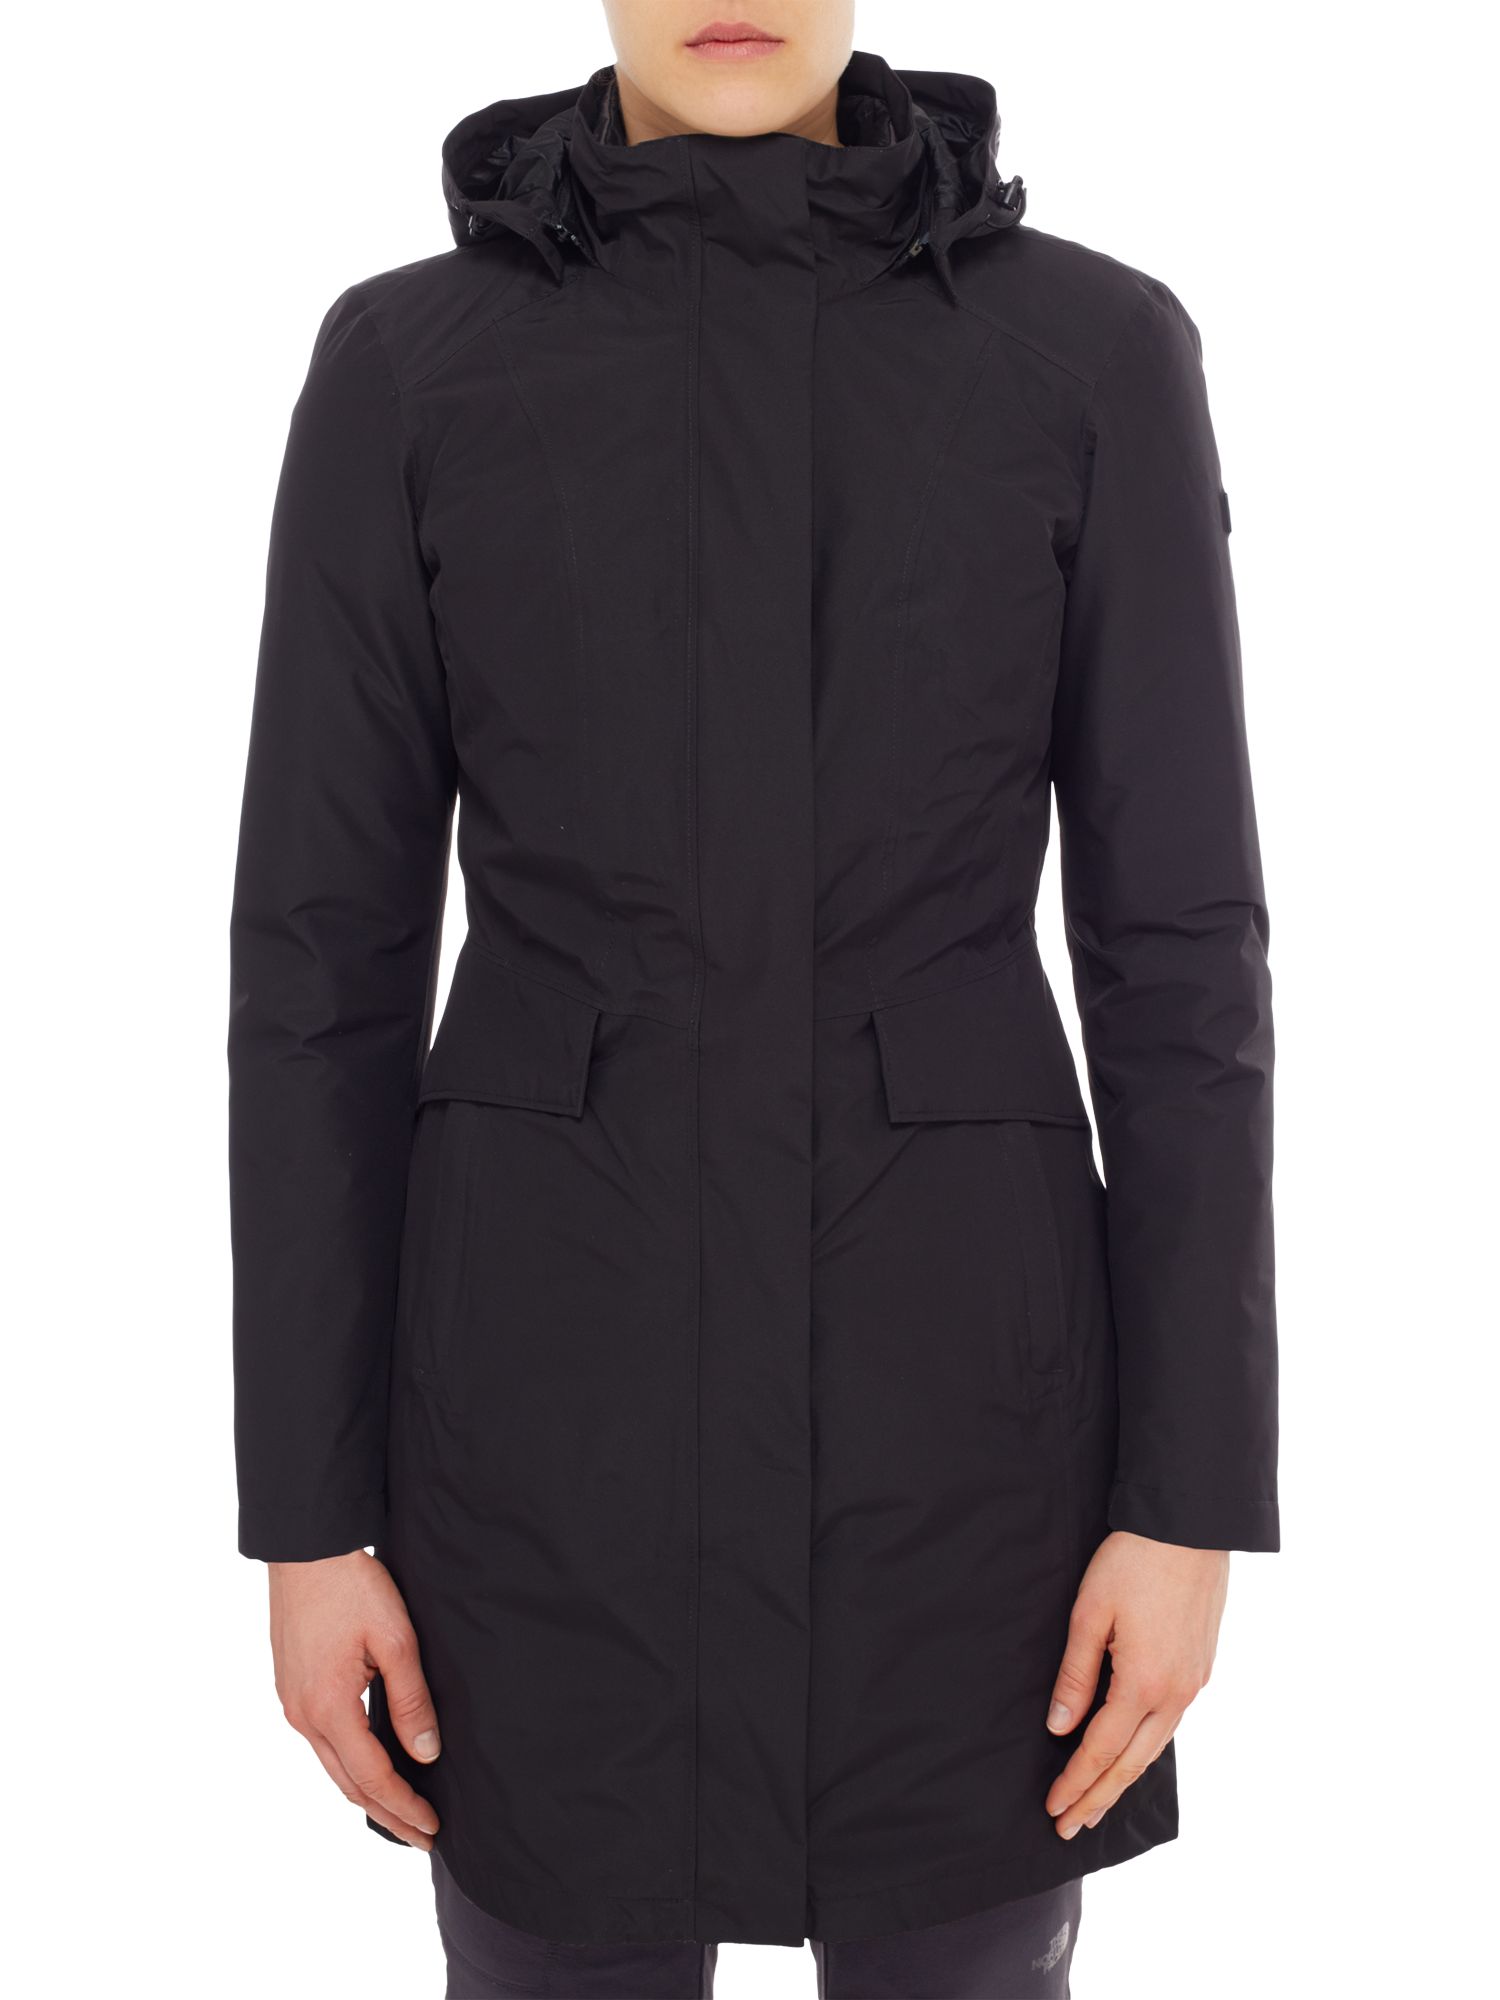 north face suzanne triclimate jacket